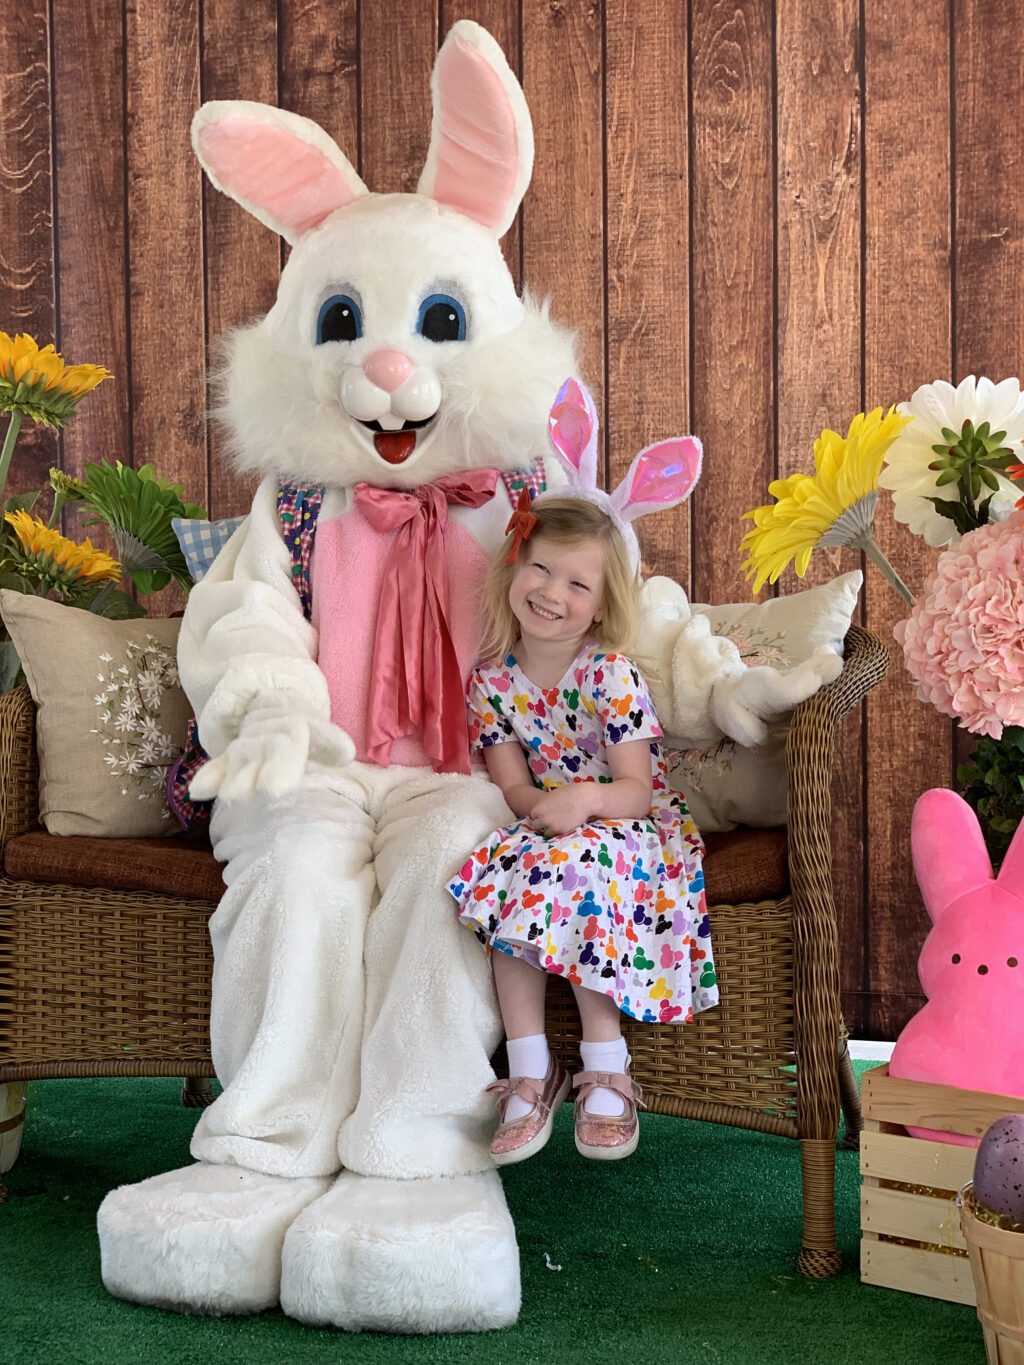 Planning a disneyland easter ? This is everything you need to know about visiting the happiest place on earth for the easter season (or easter sunday itself ).